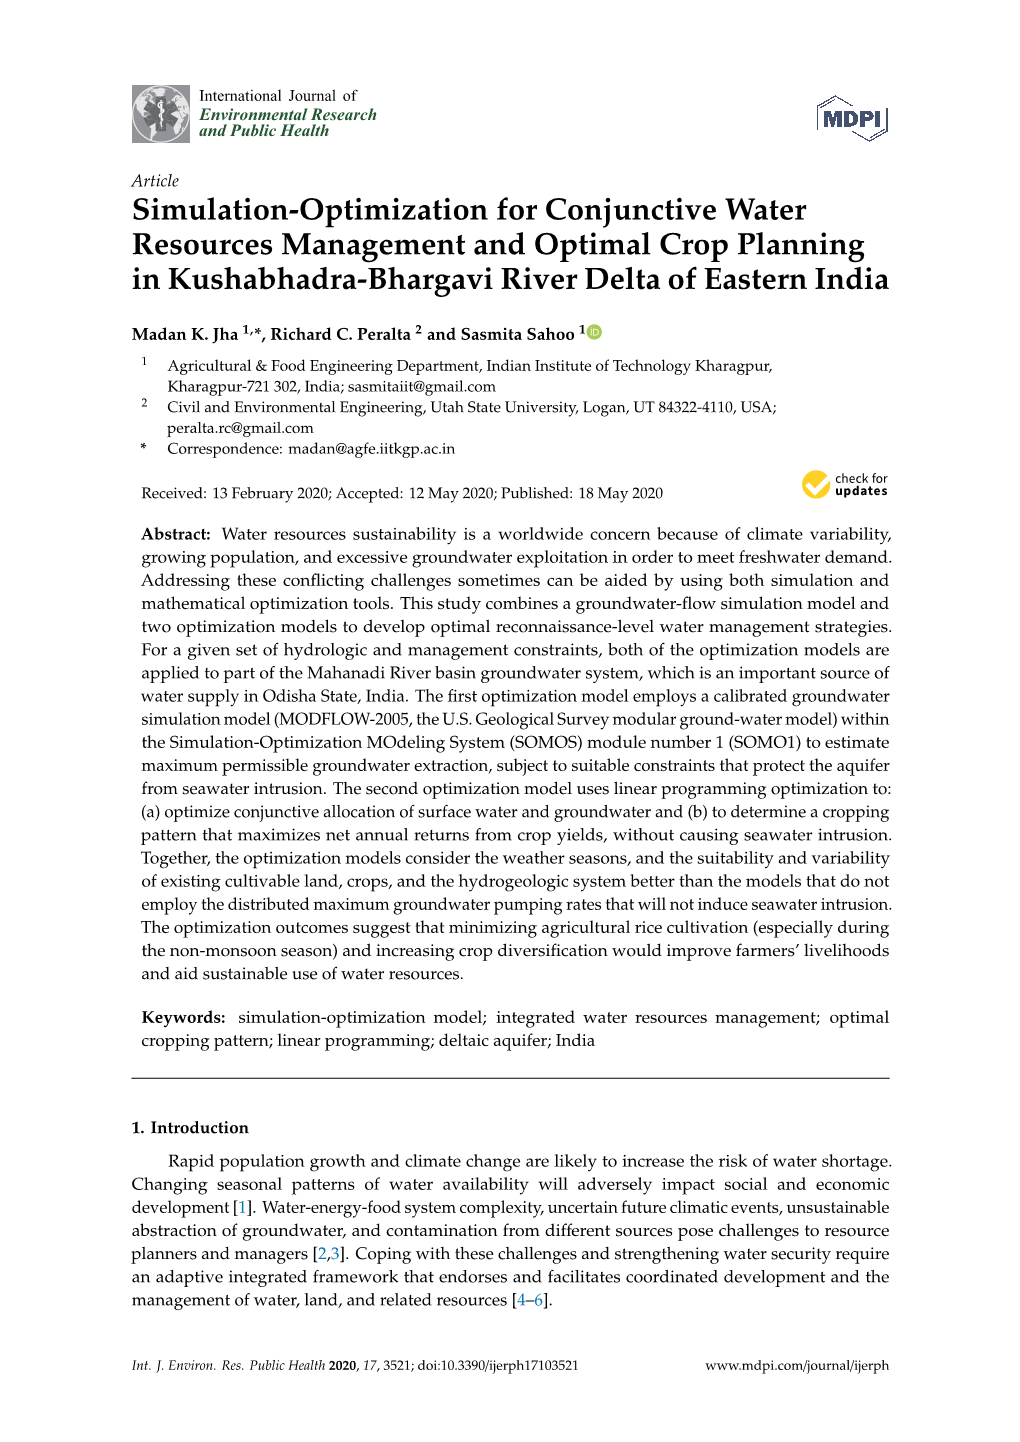 Simulation-Optimization for Conjunctive Water Resources Management and Optimal Crop Planning in Kushabhadra-Bhargavi River Delta of Eastern India